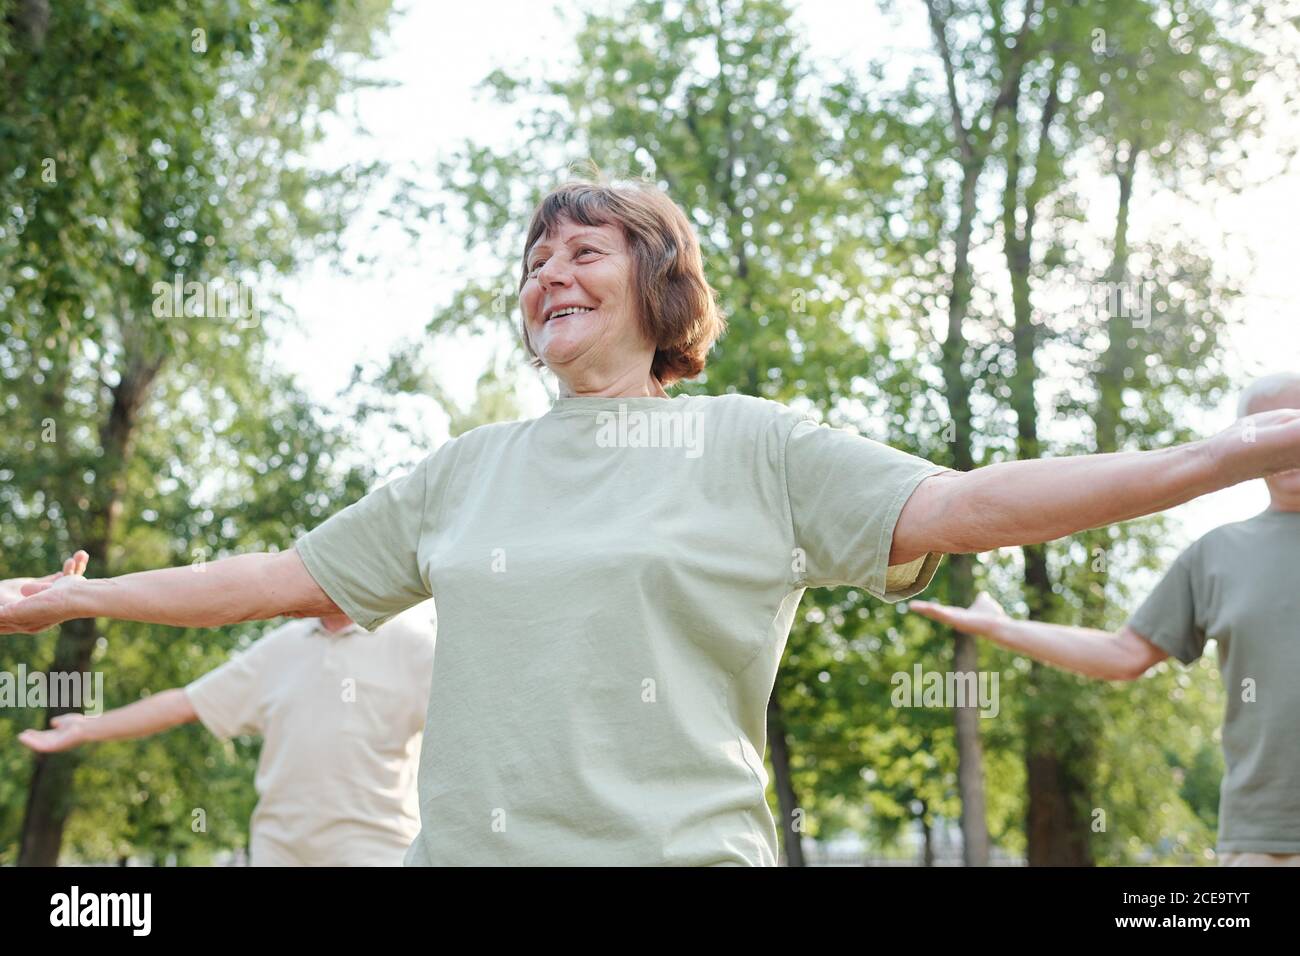 Below view of cheerful energetic senior woman in tshirt outstretching arms while enjoying morning exercise in park Stock Photo